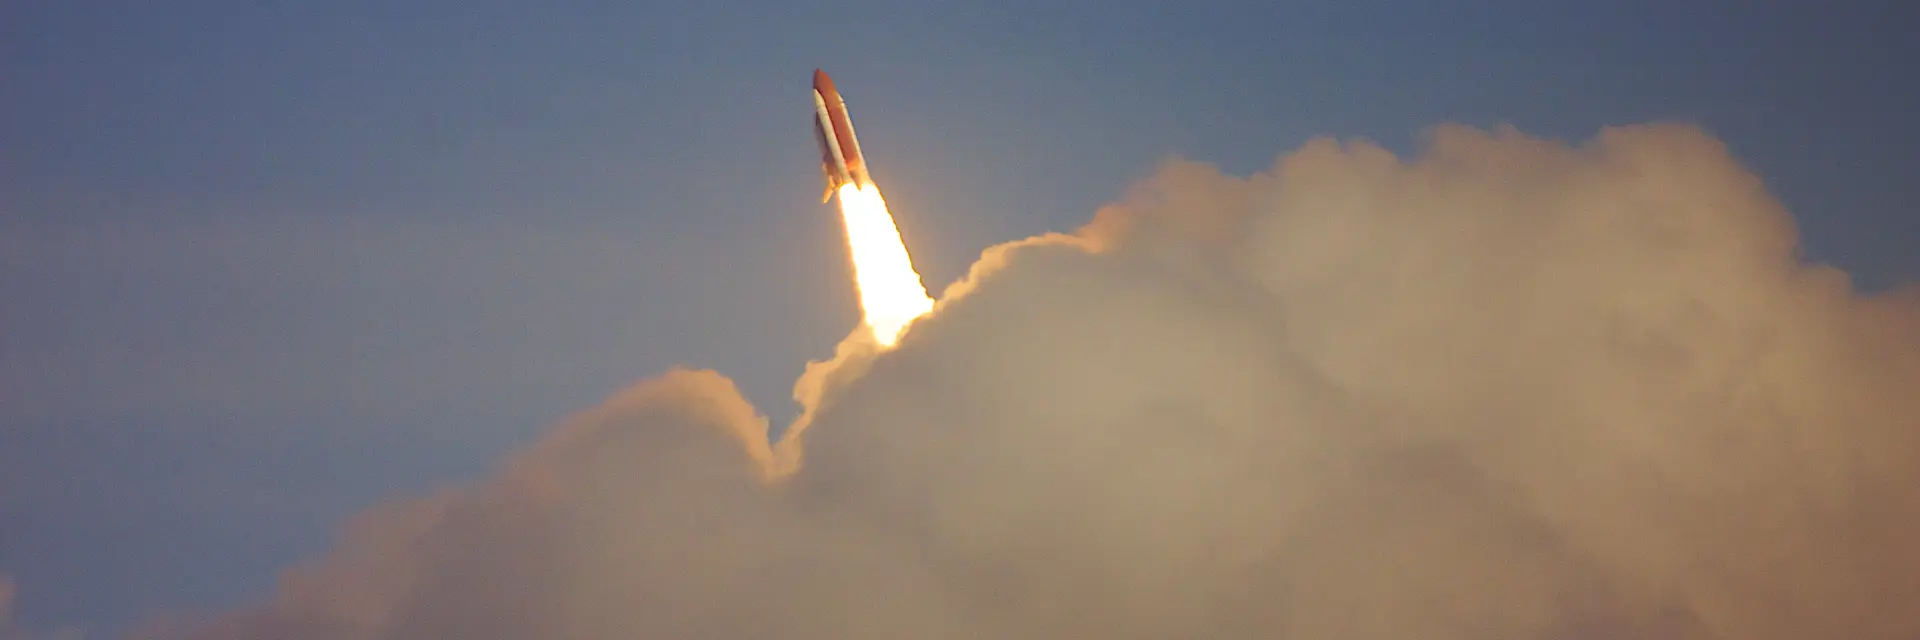 A rocket that has just launched